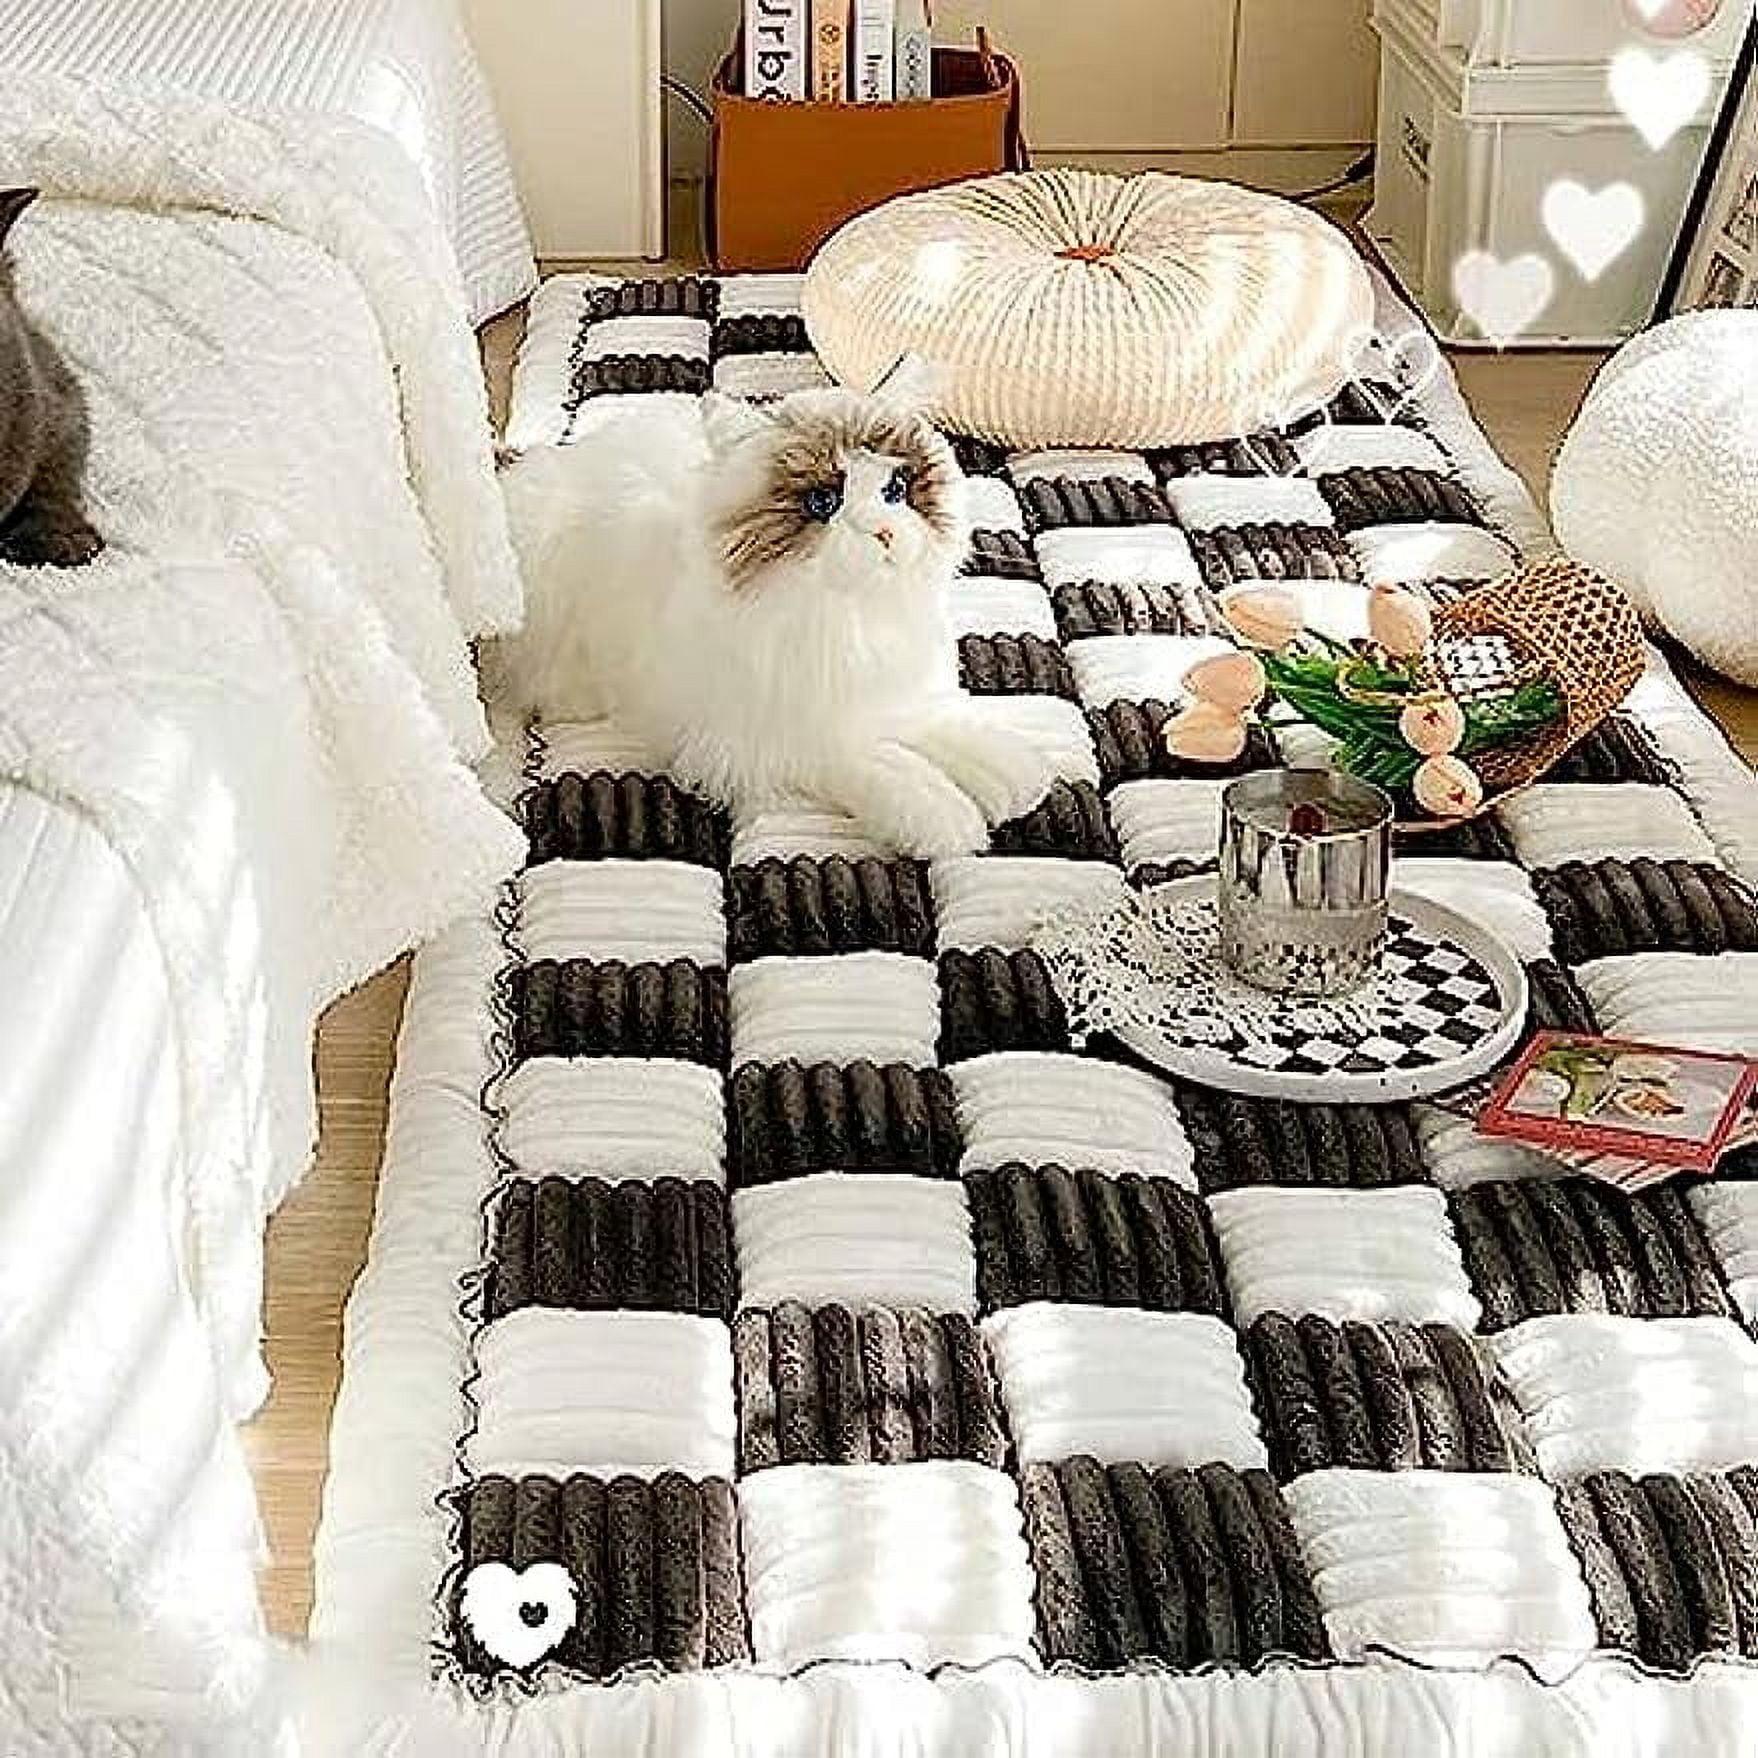  Customer reviews: Funnyfuzzy Cream-Coloured Large Plaid Square  Pet Mat Bed Couch Cover, Funny Fuzzy Couch Cover, Dog Blankets for Large  Dogs, Waterproof Blanket Dog Bed Cover Pet Blanket (Dark Brown,27.6x59.06  in)